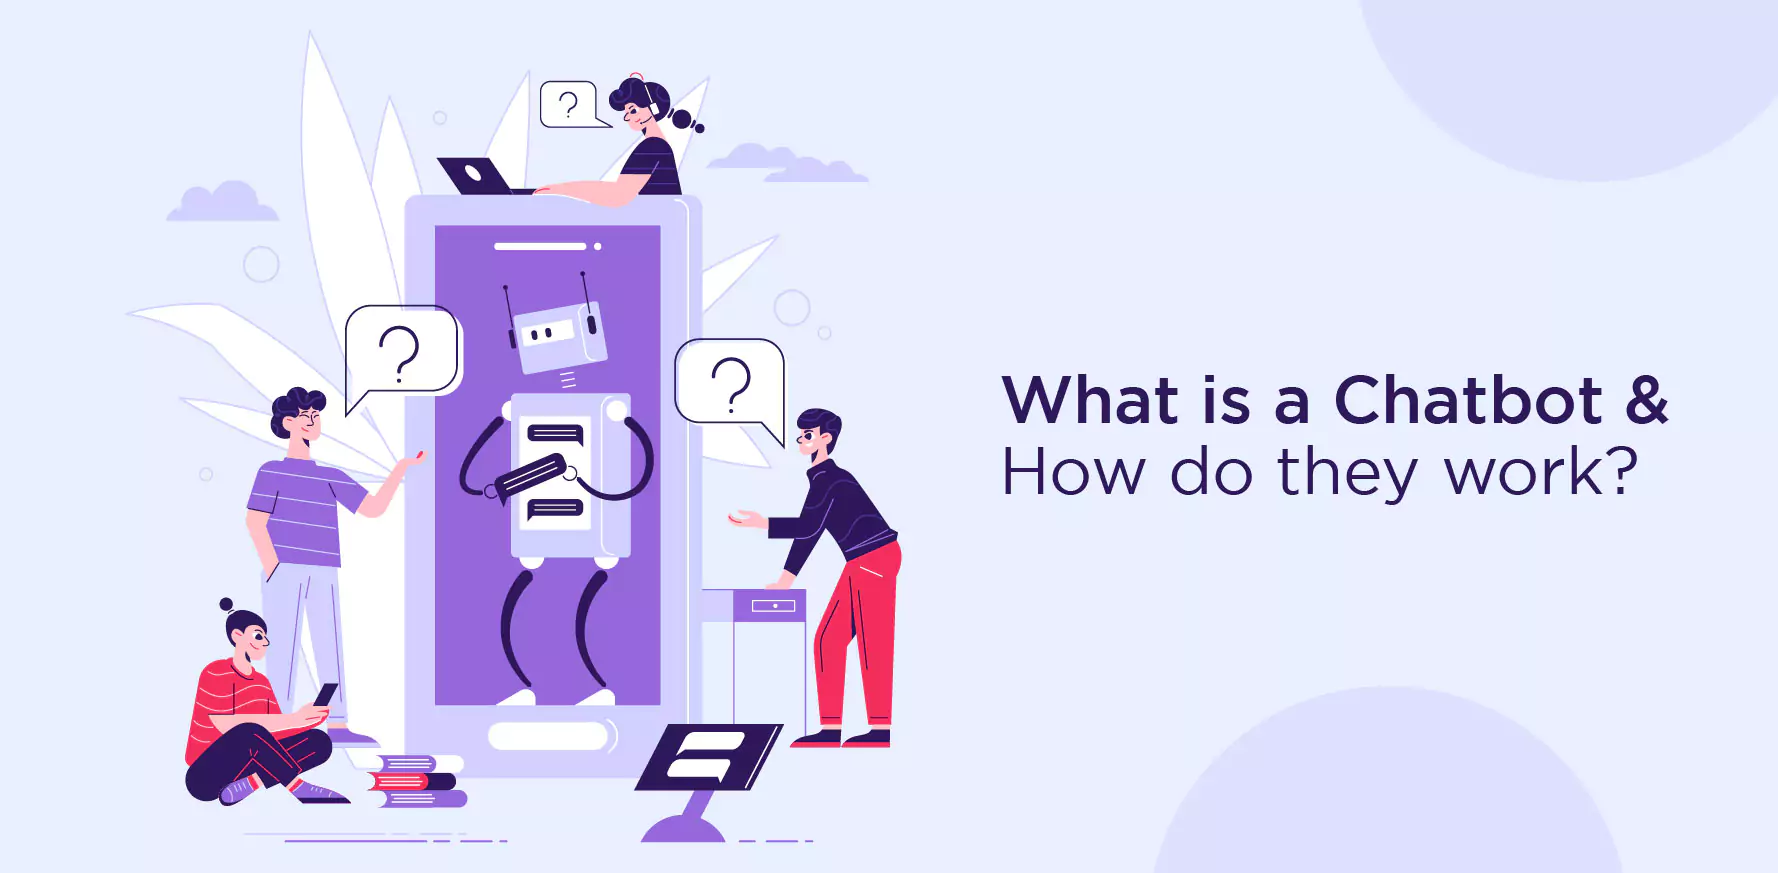 What is a Chatbot & How do they work?